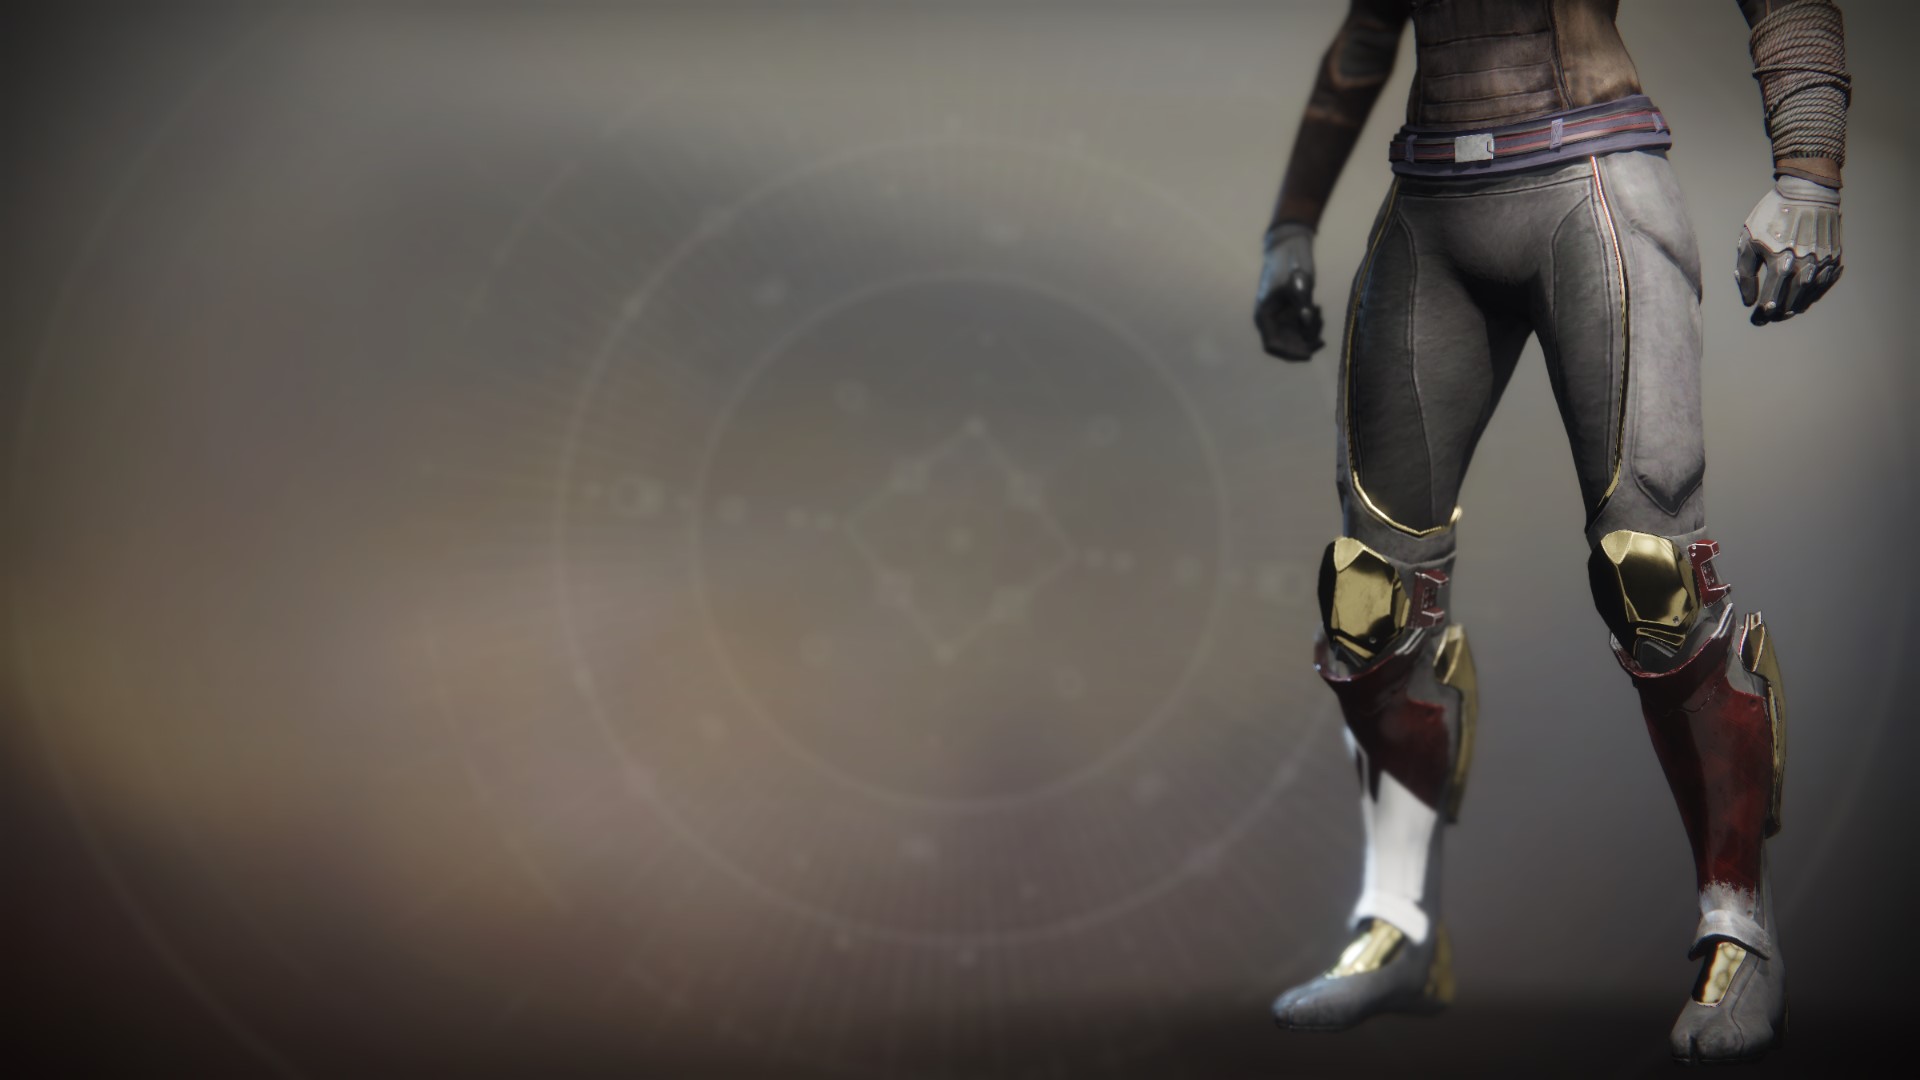 An in-game render of the Sovereign Boots.